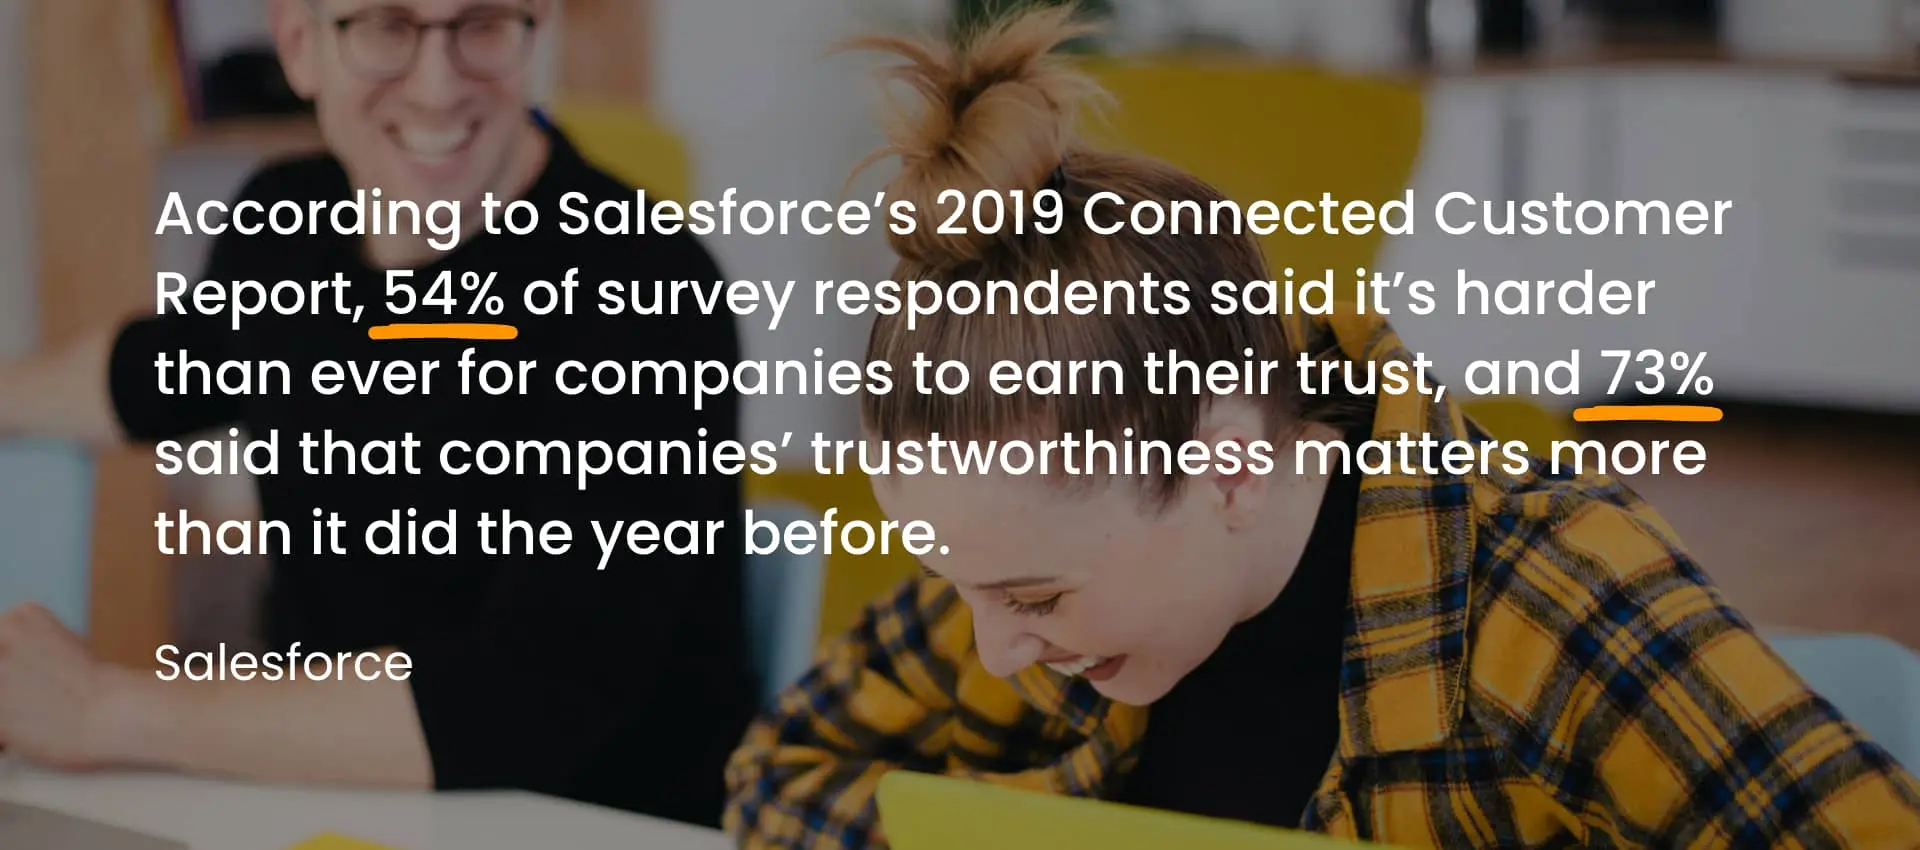 Salesforce’s 2019 Connected Customer Report